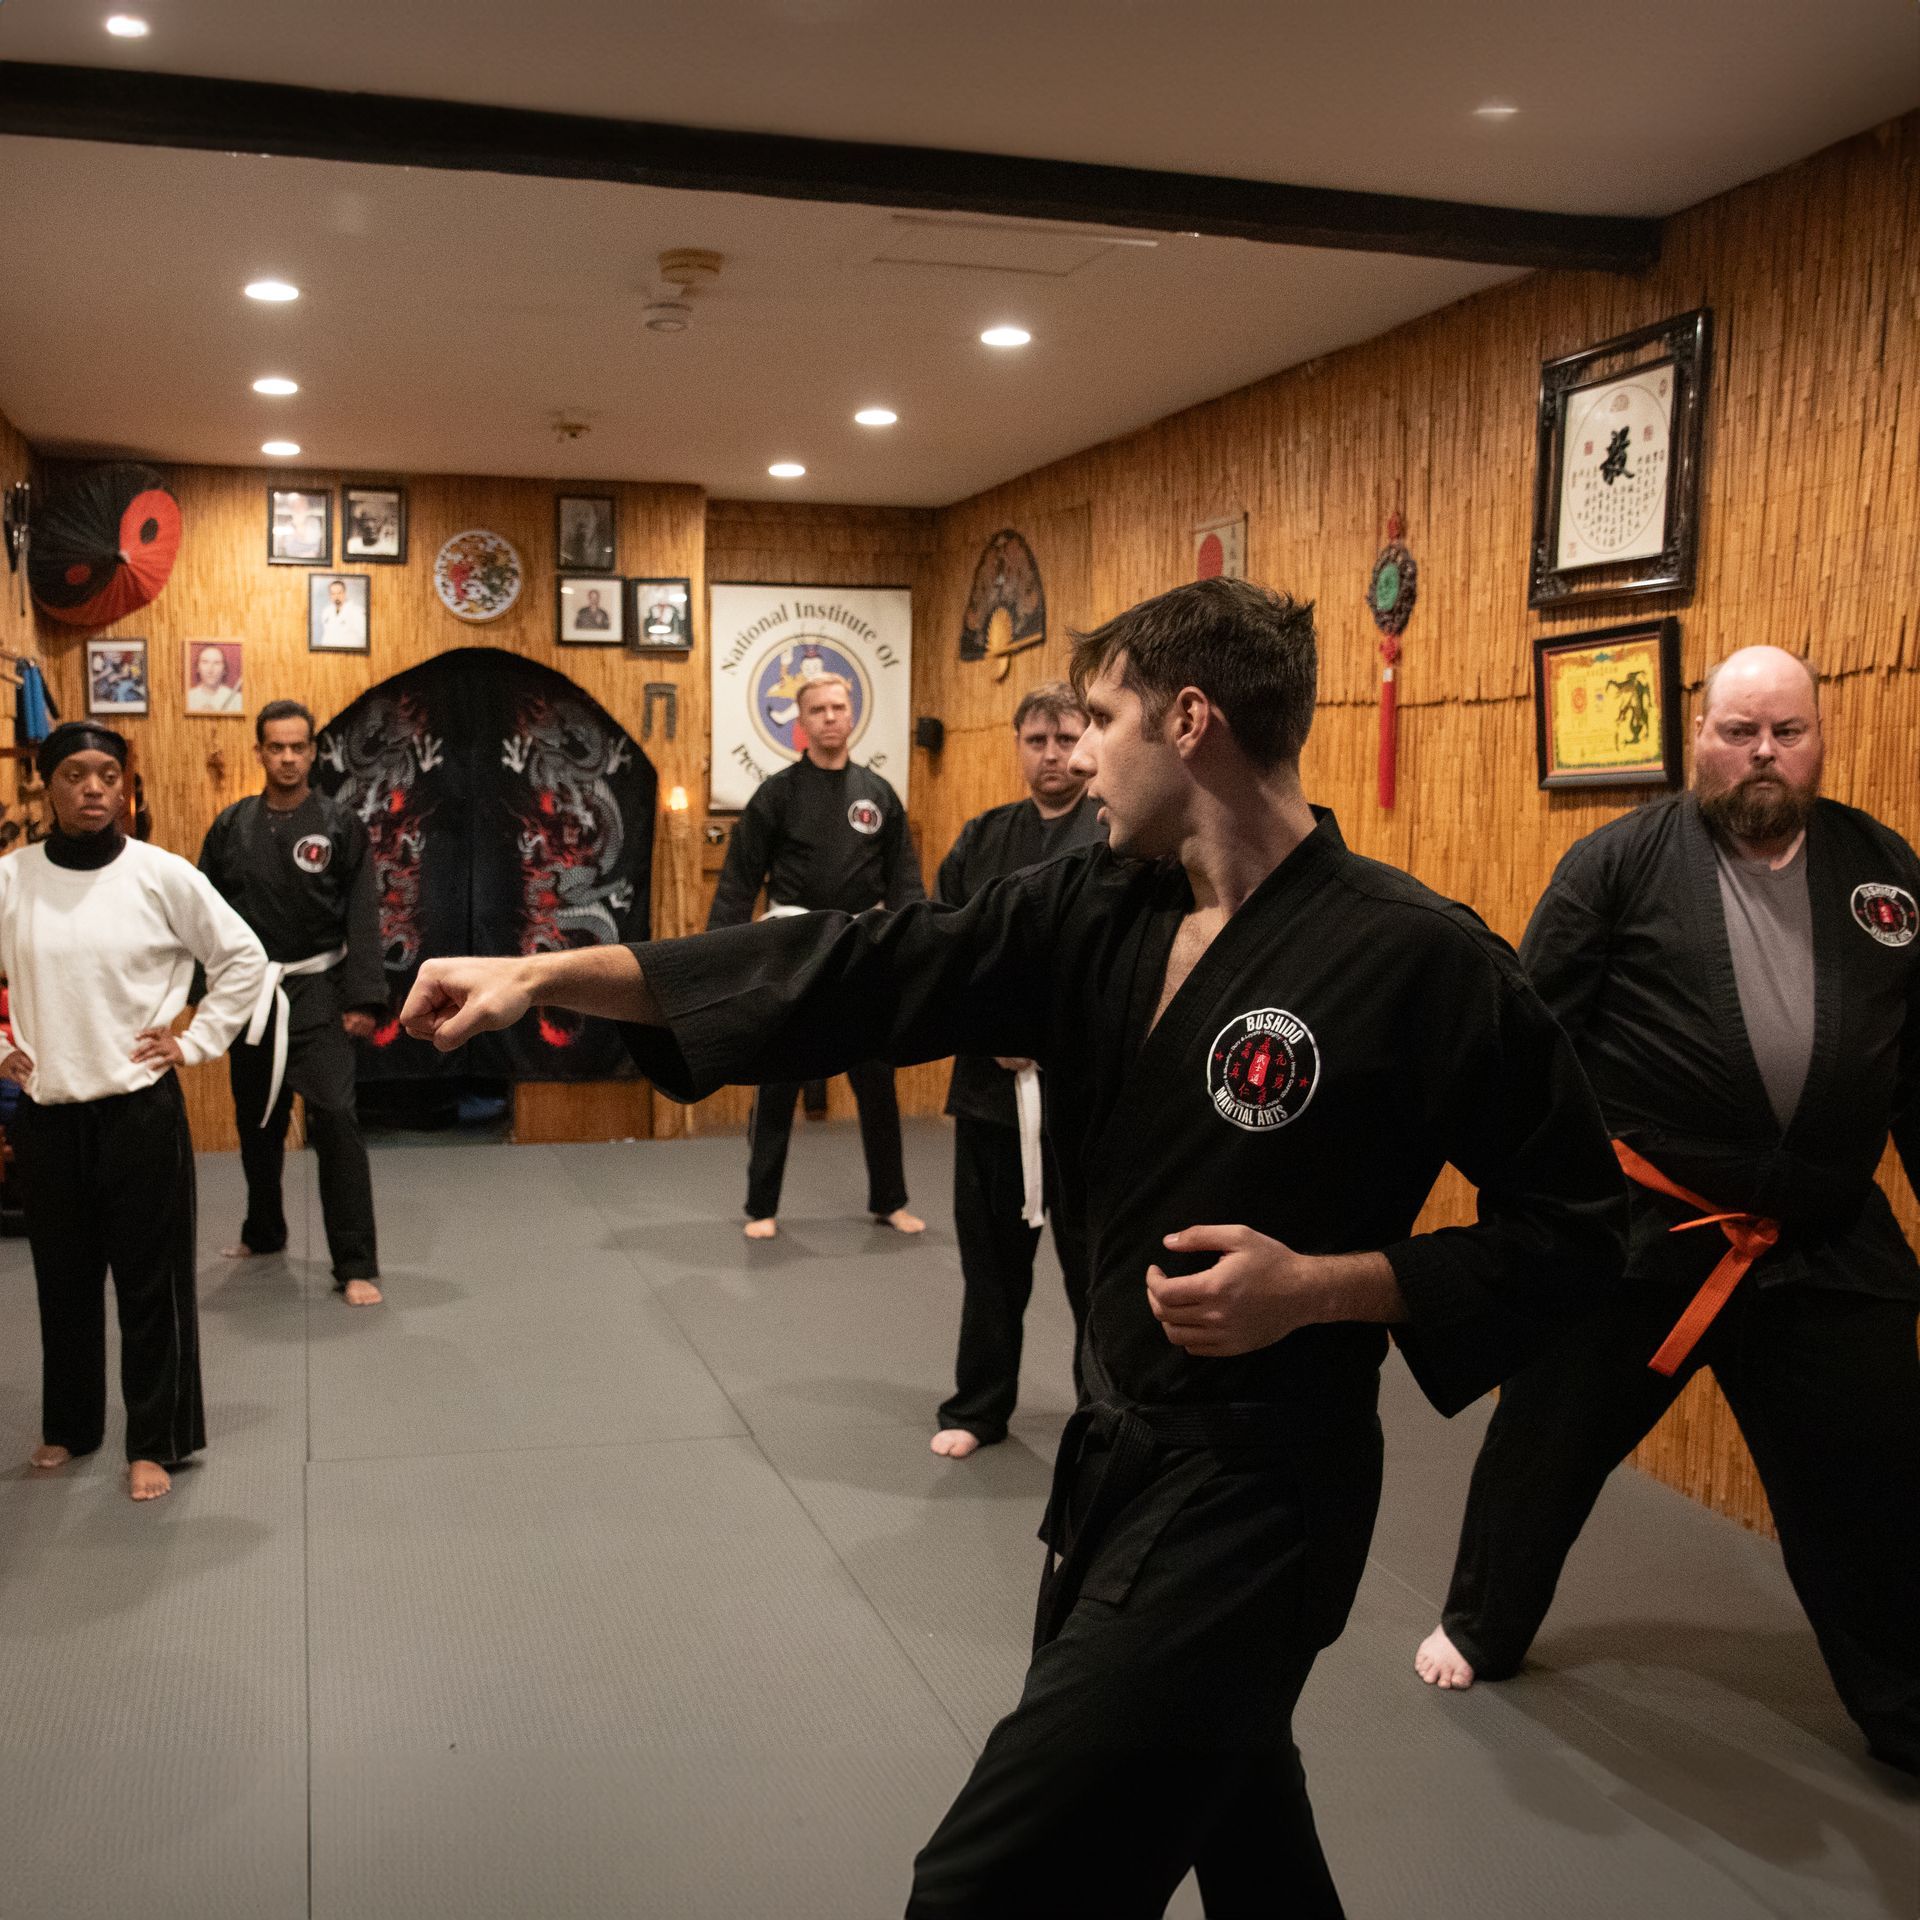 A group of men are practicing martial arts in a gym